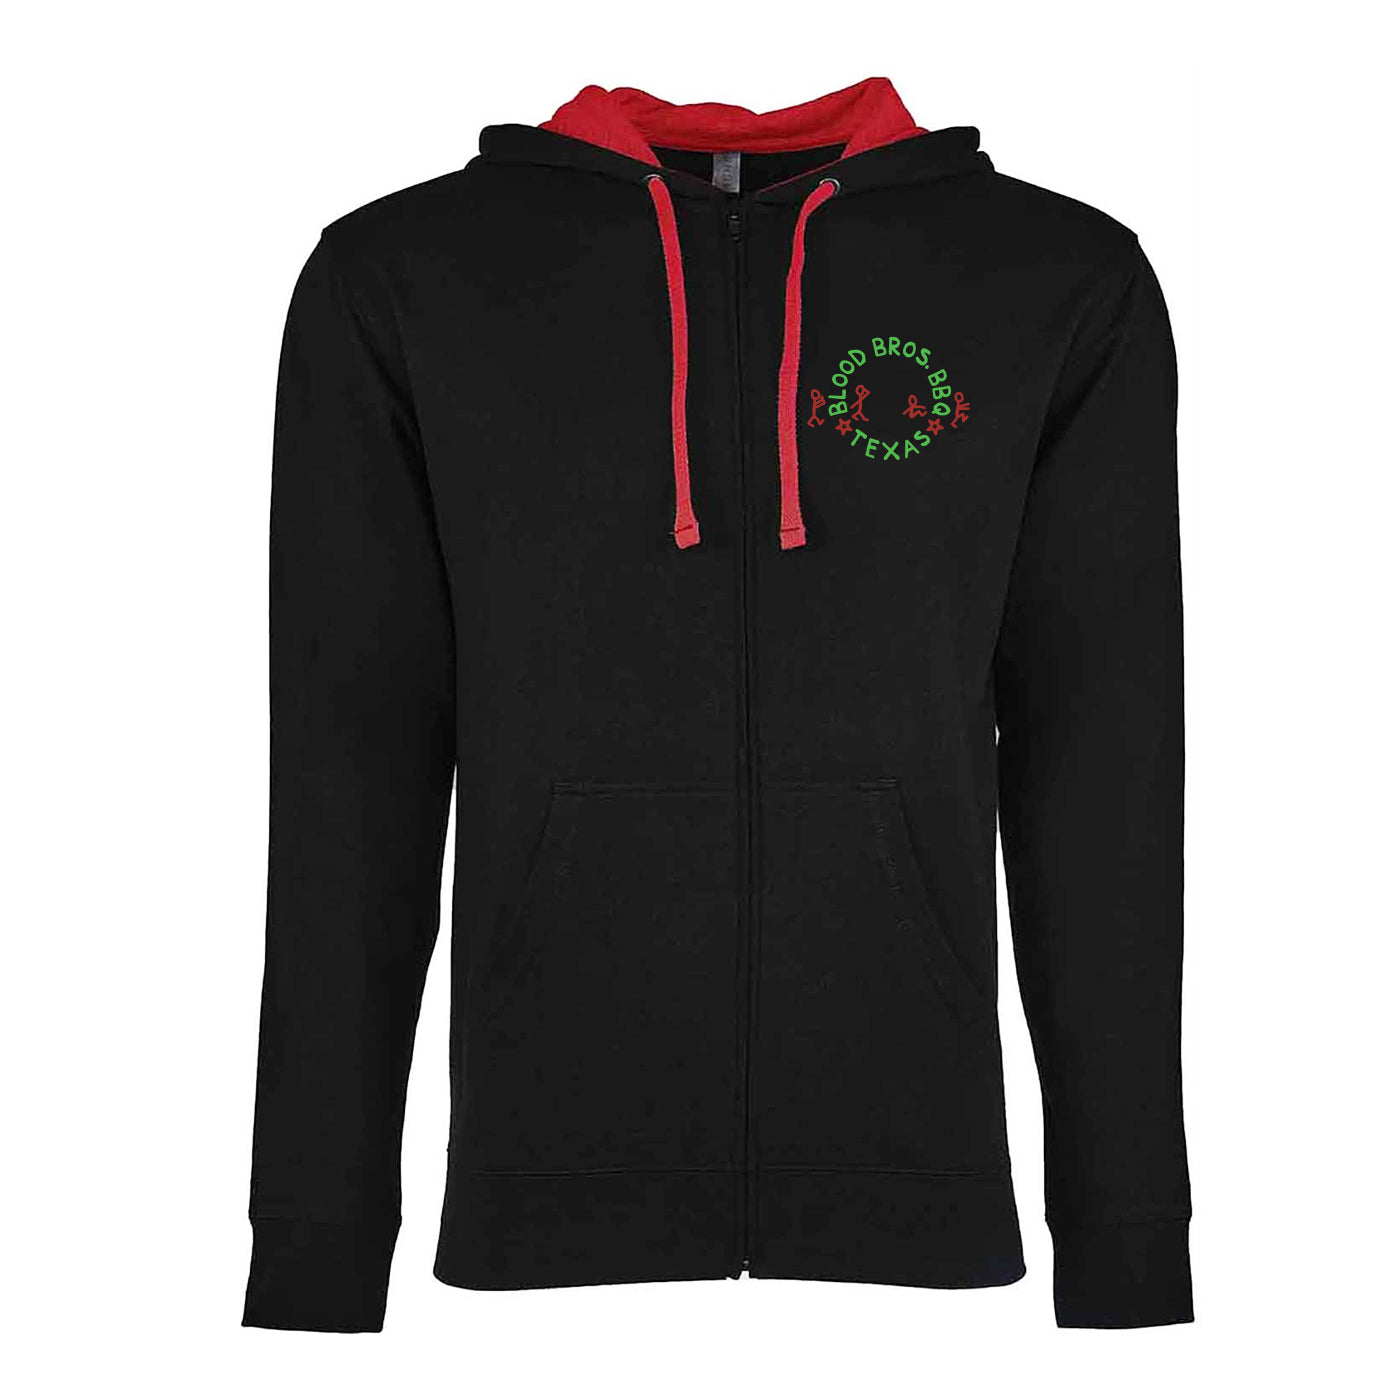 BURNT END THEORY Full-Zip Hoodie - Black and Red